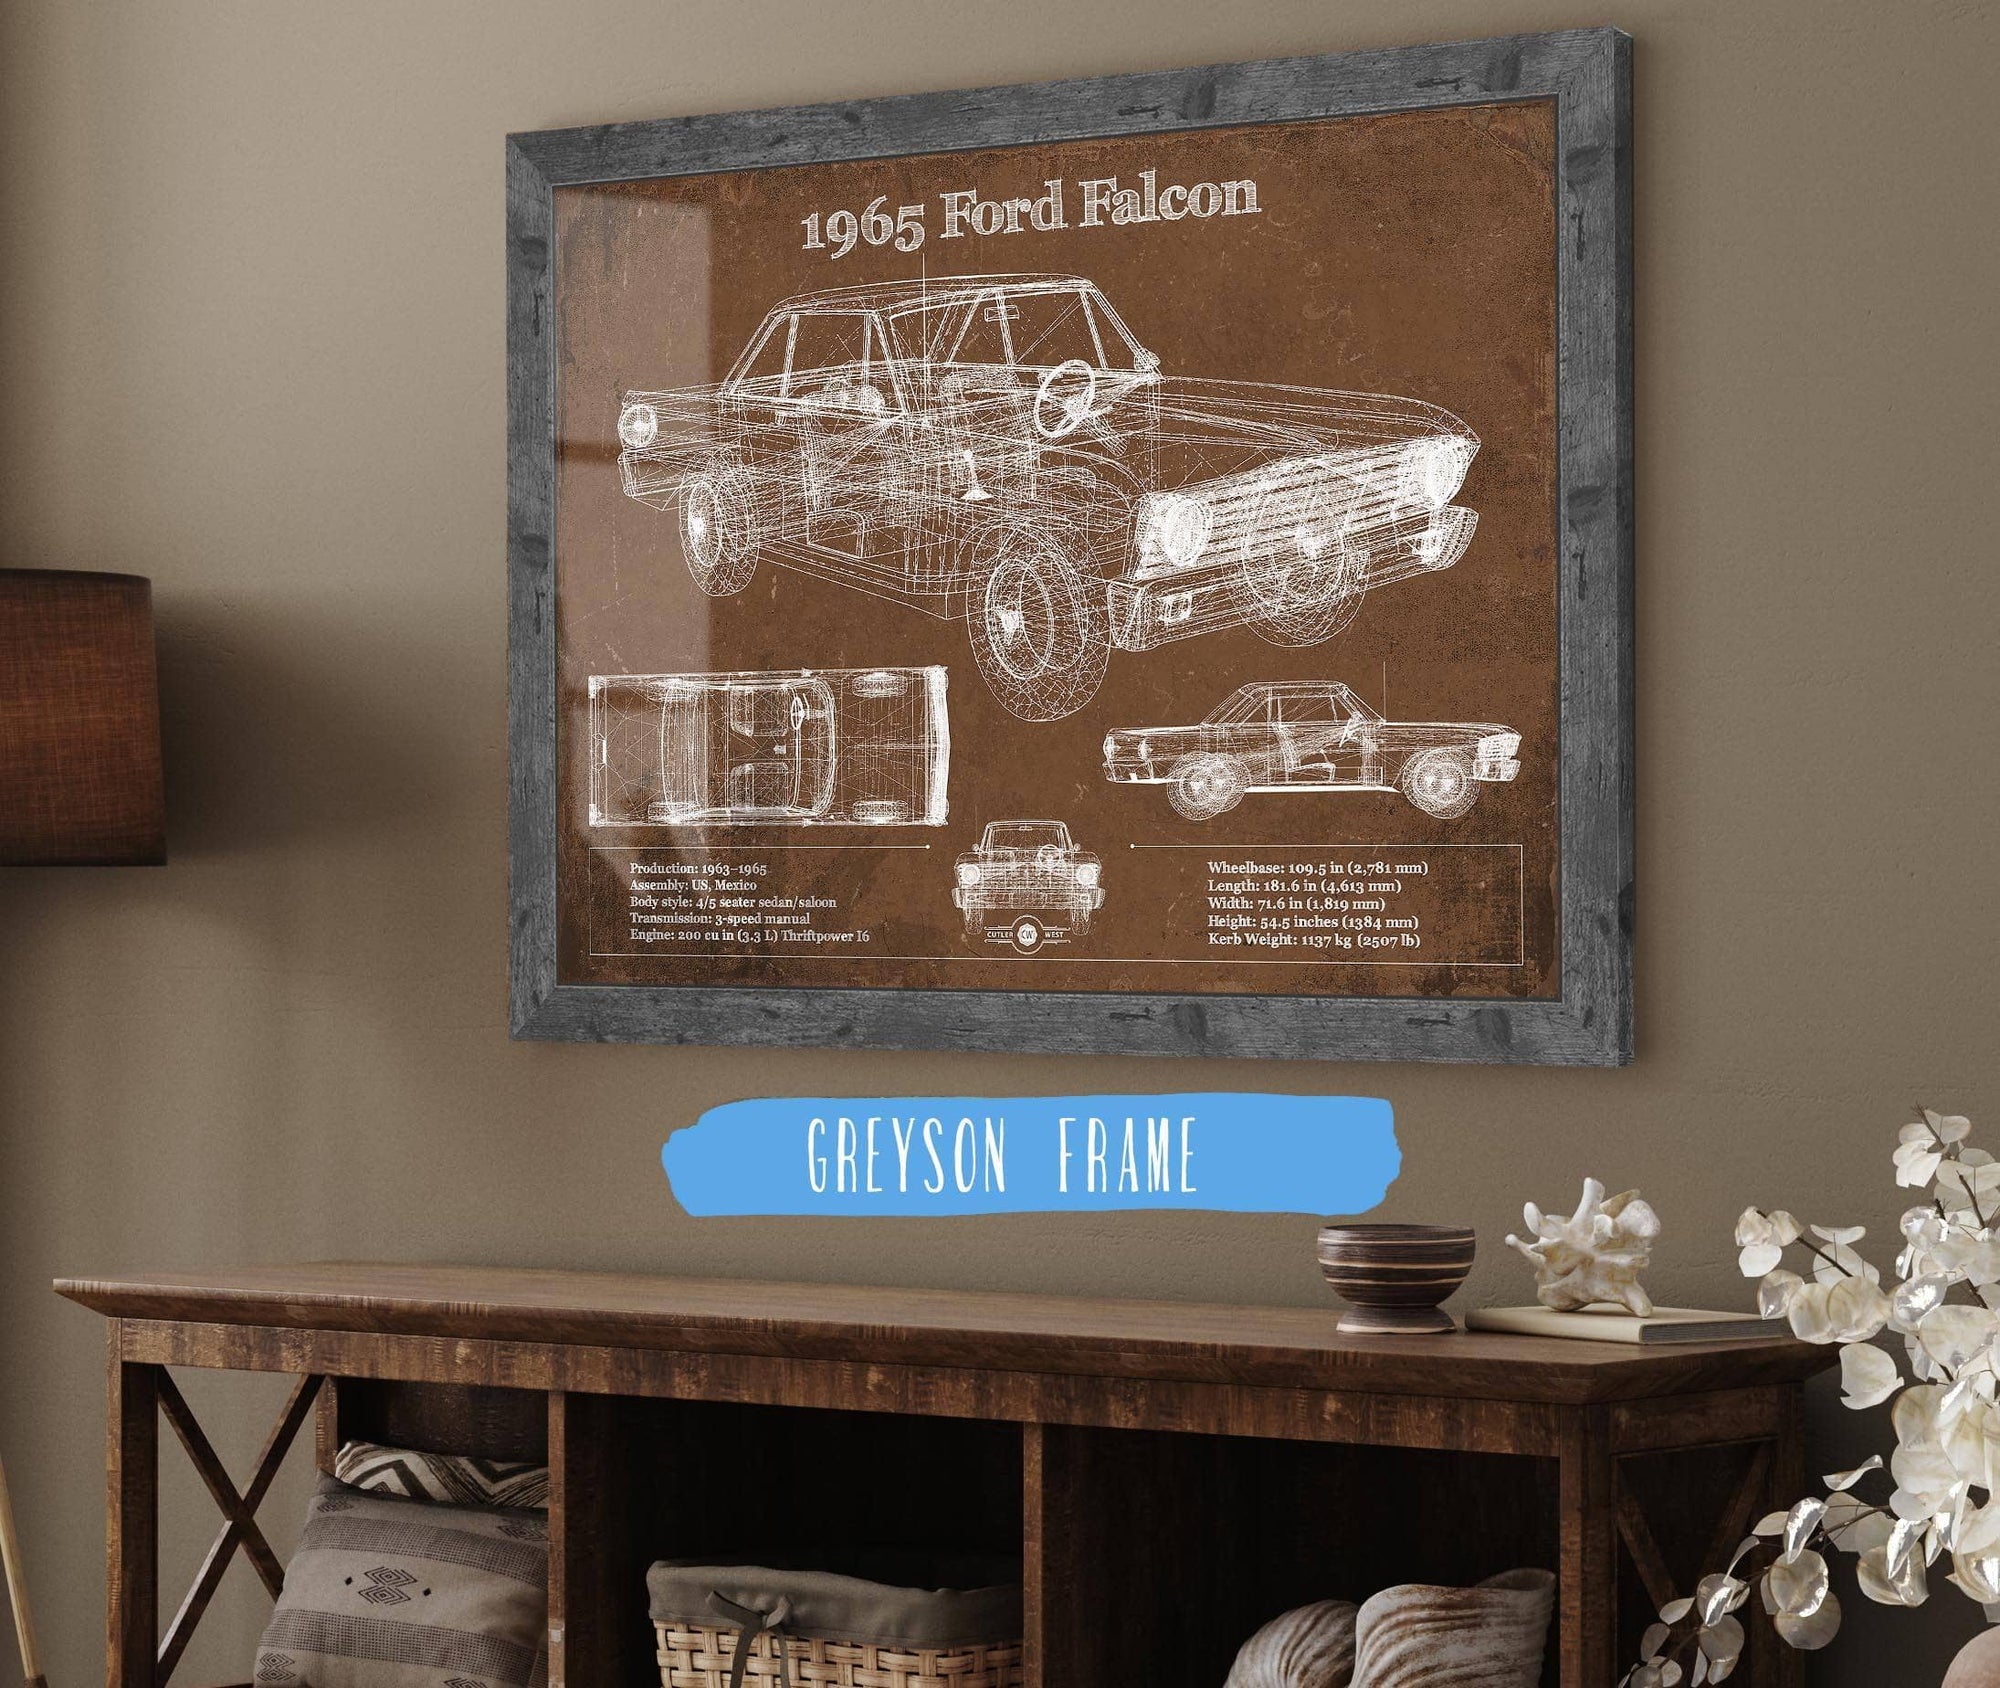 Cutler West Ford Collection 1965 Ford Falcon Blueprint Vintage Auto Print